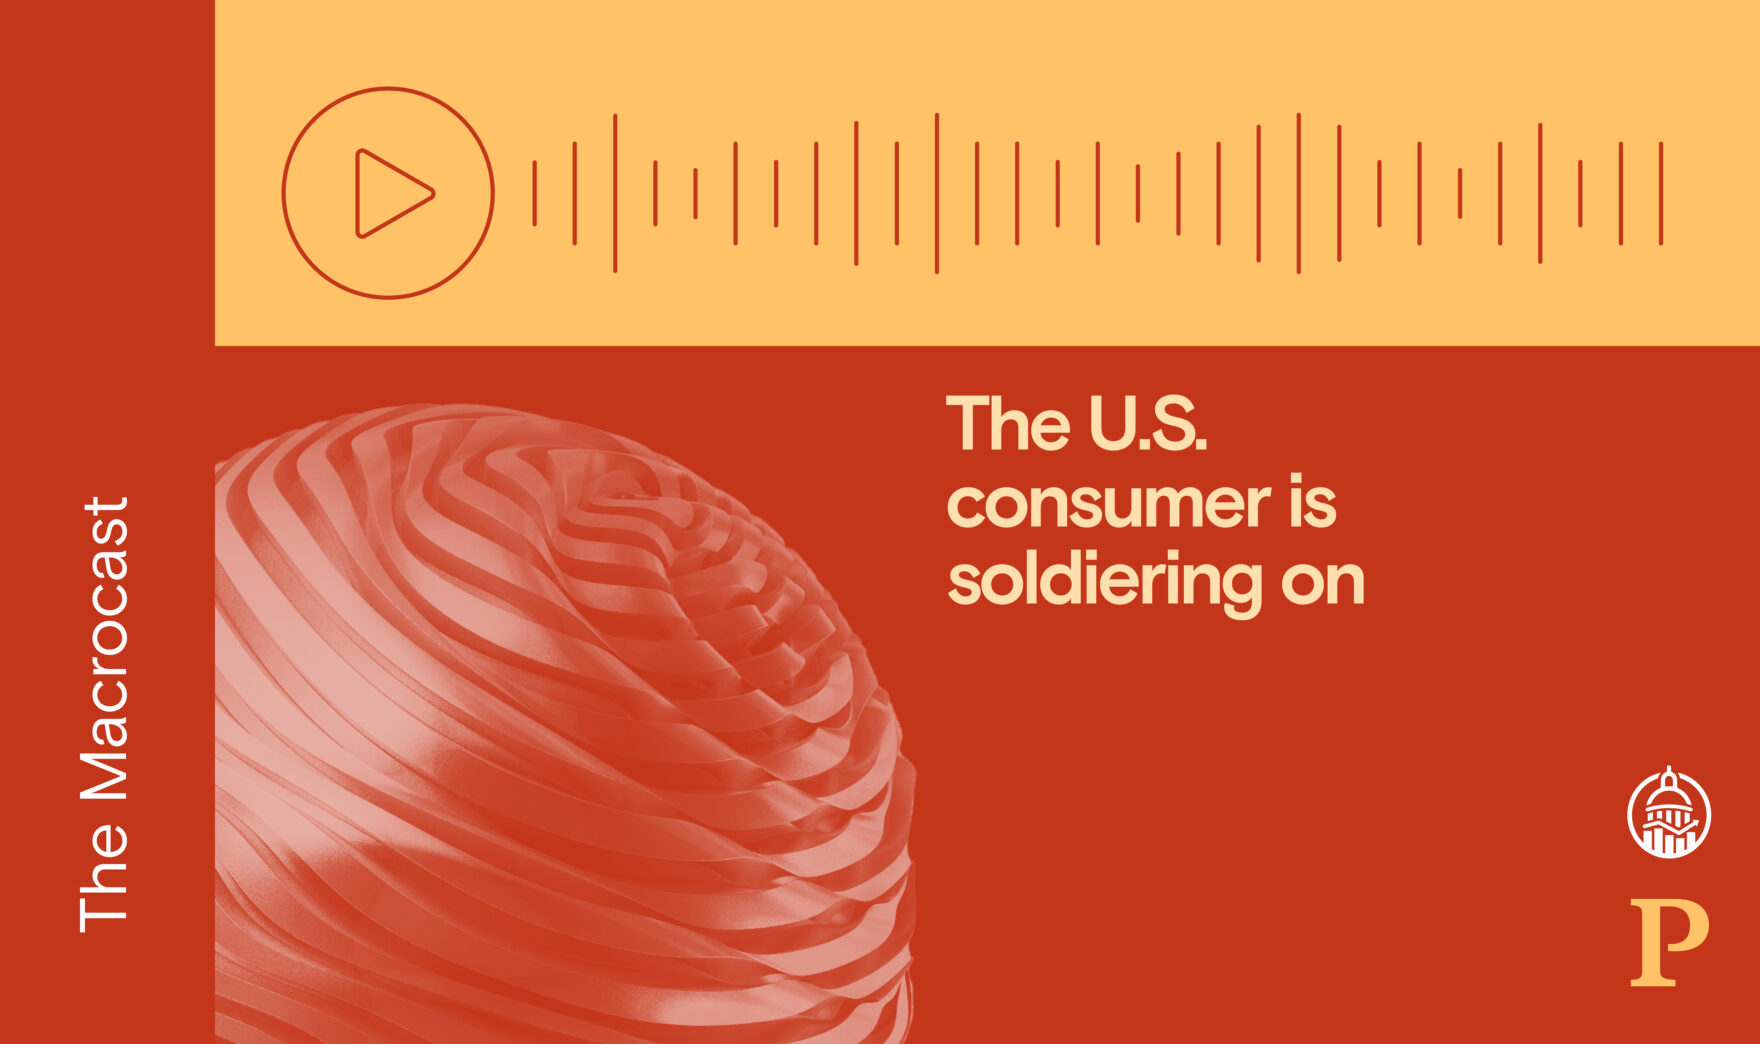 Macrocast: The U.S. consumer is soldiering on